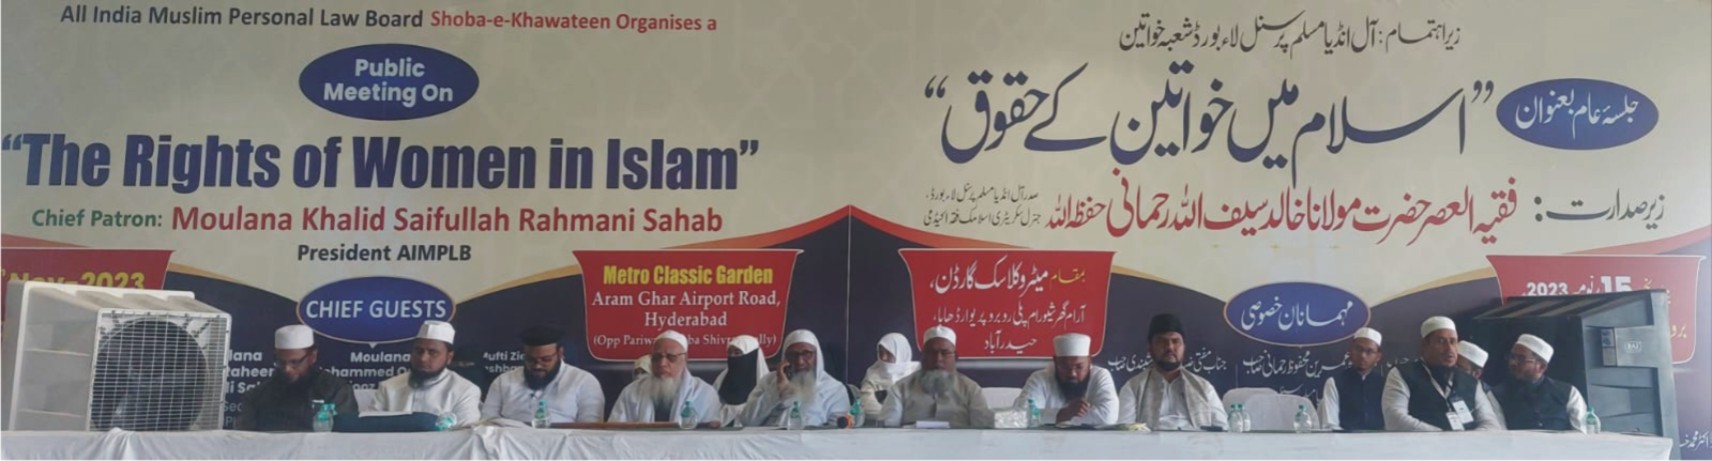 Muslim Board’s Women’s Conference – The board makes all efforts to ensure women’s rights